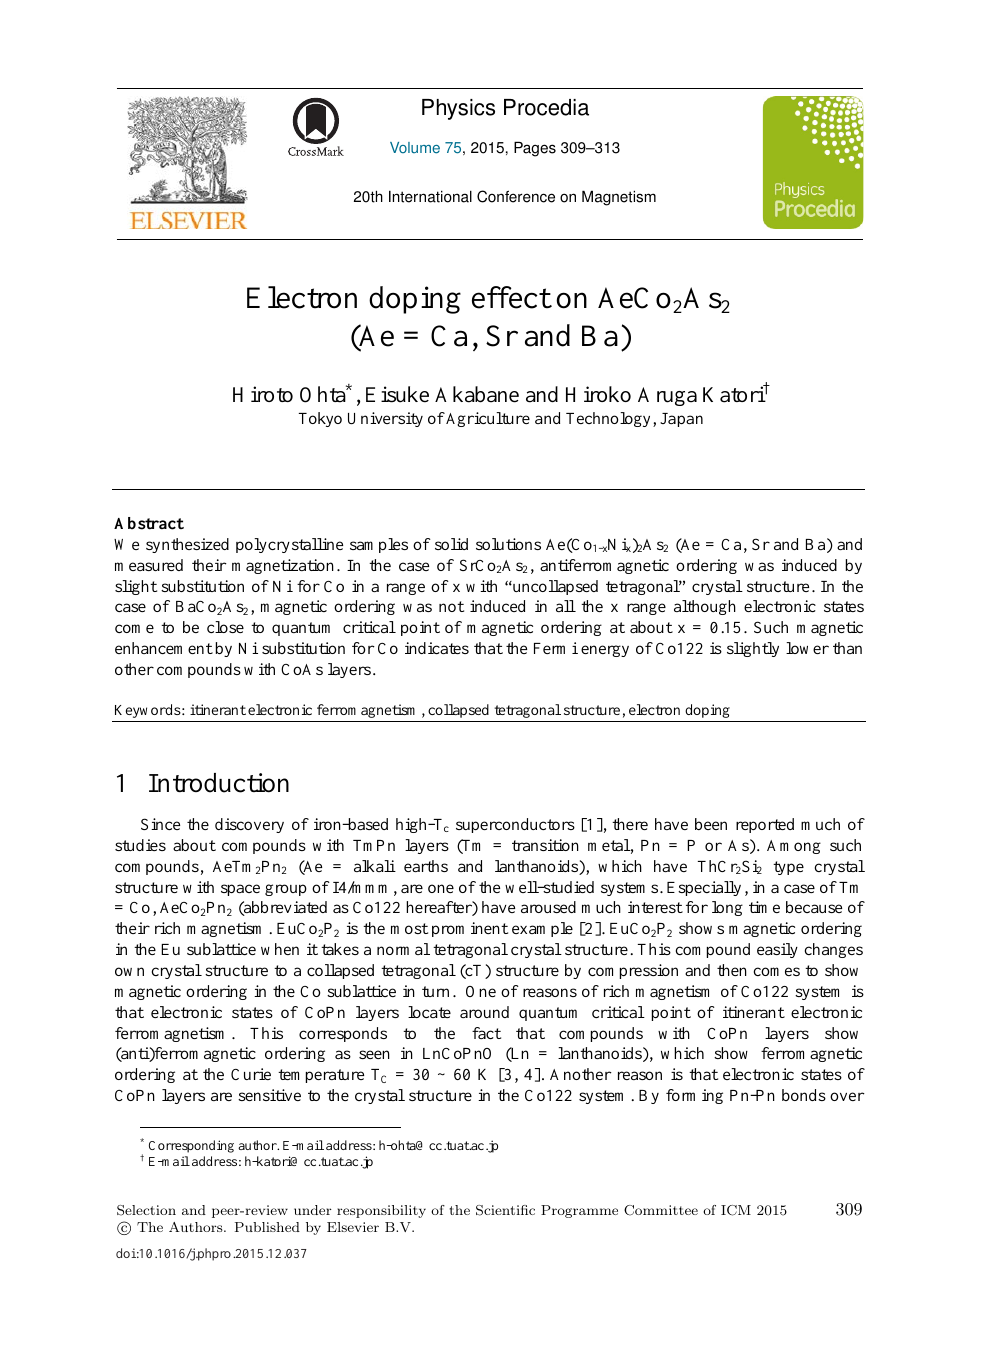 Electron Doping Effect On Aeco2as2 Ae Ca Sr And Ba Topic Of Research Paper In Nano Technology Download Scholarly Article Pdf And Read For Free On Cyberleninka Open Science Hub